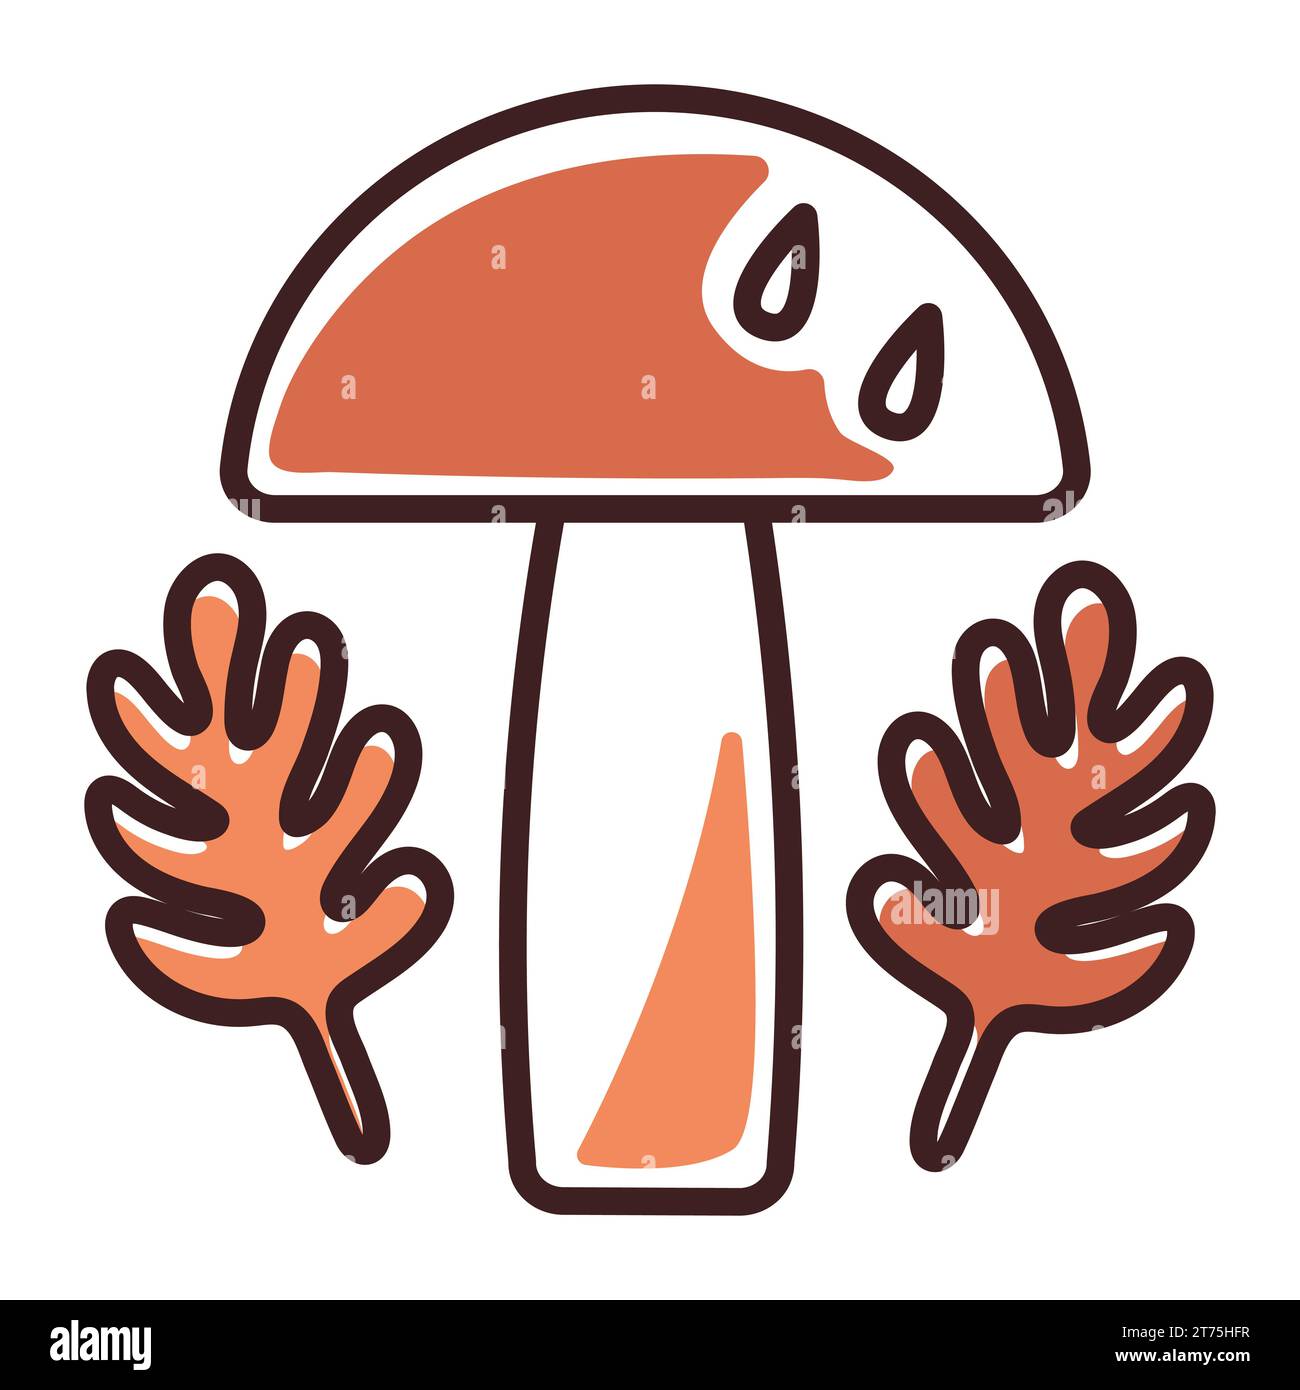 Groovy mushroom and leaves, autumn season icon, fall pictogram in orange colors Stock Vector